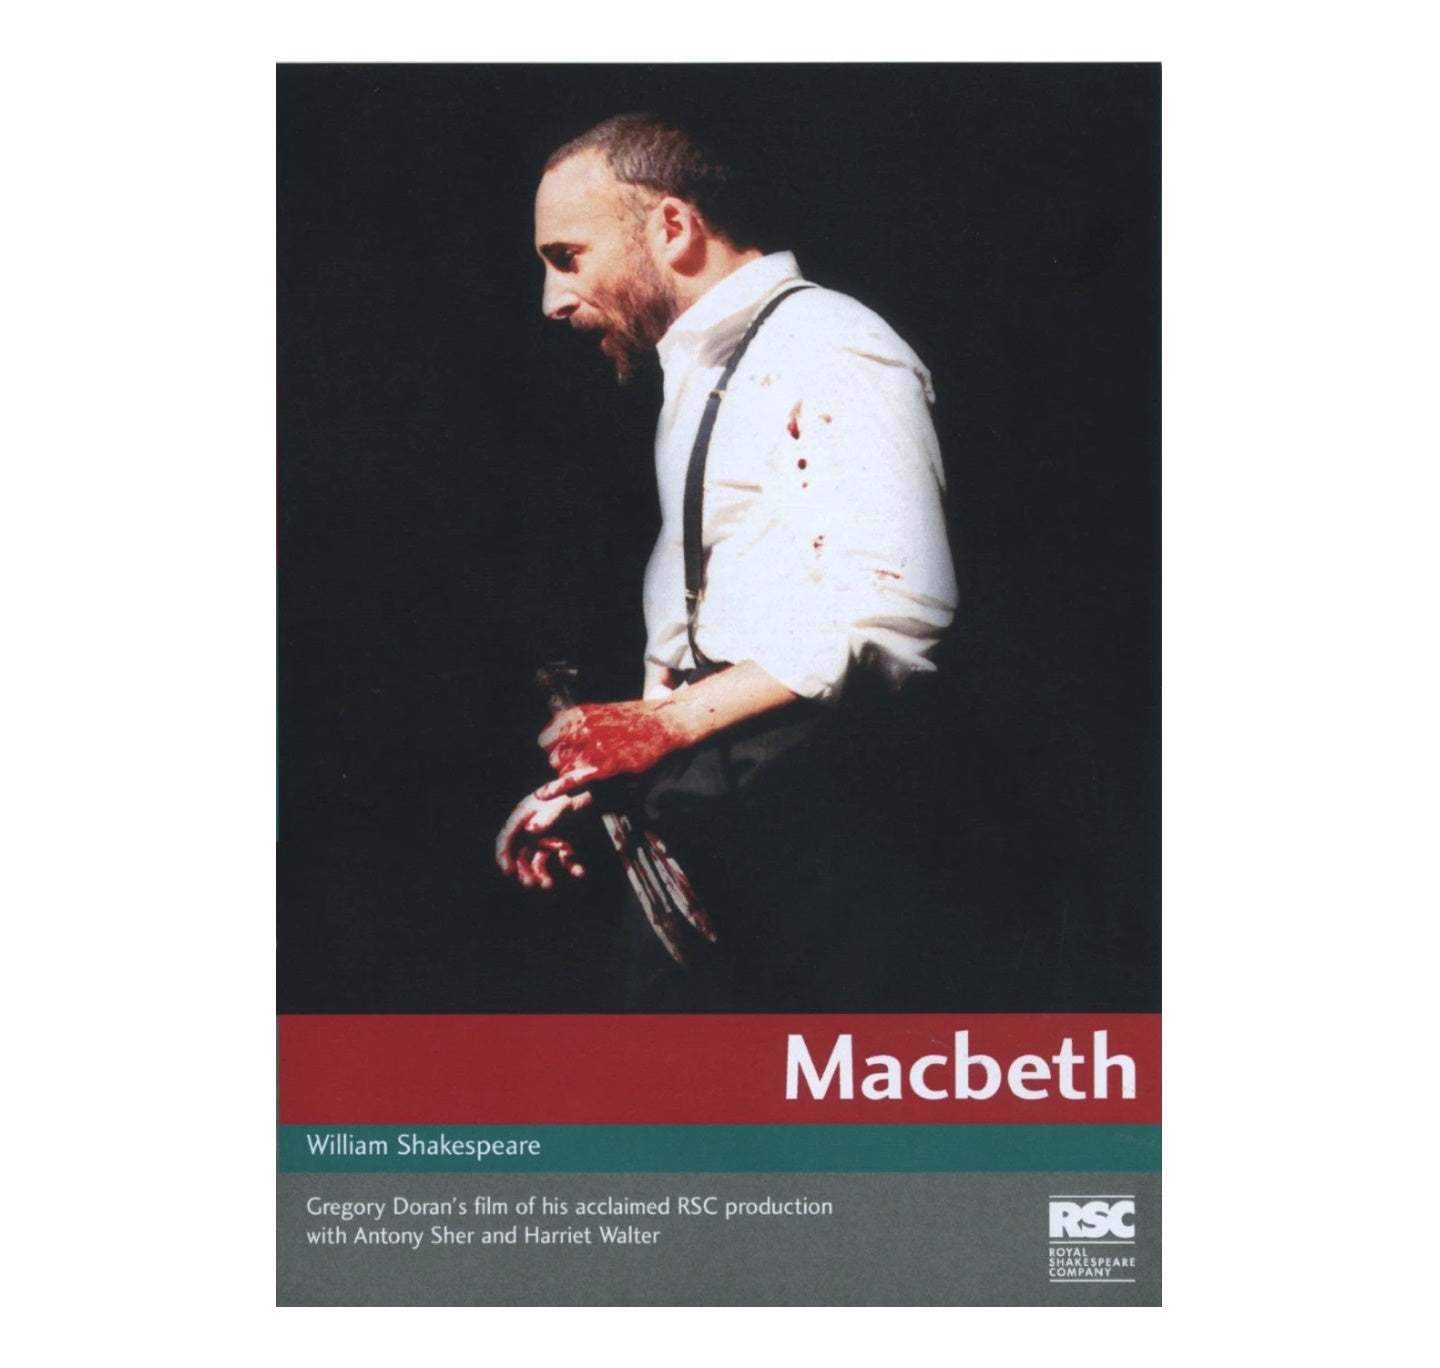 Shakespeare related DVDs – The RSC shop